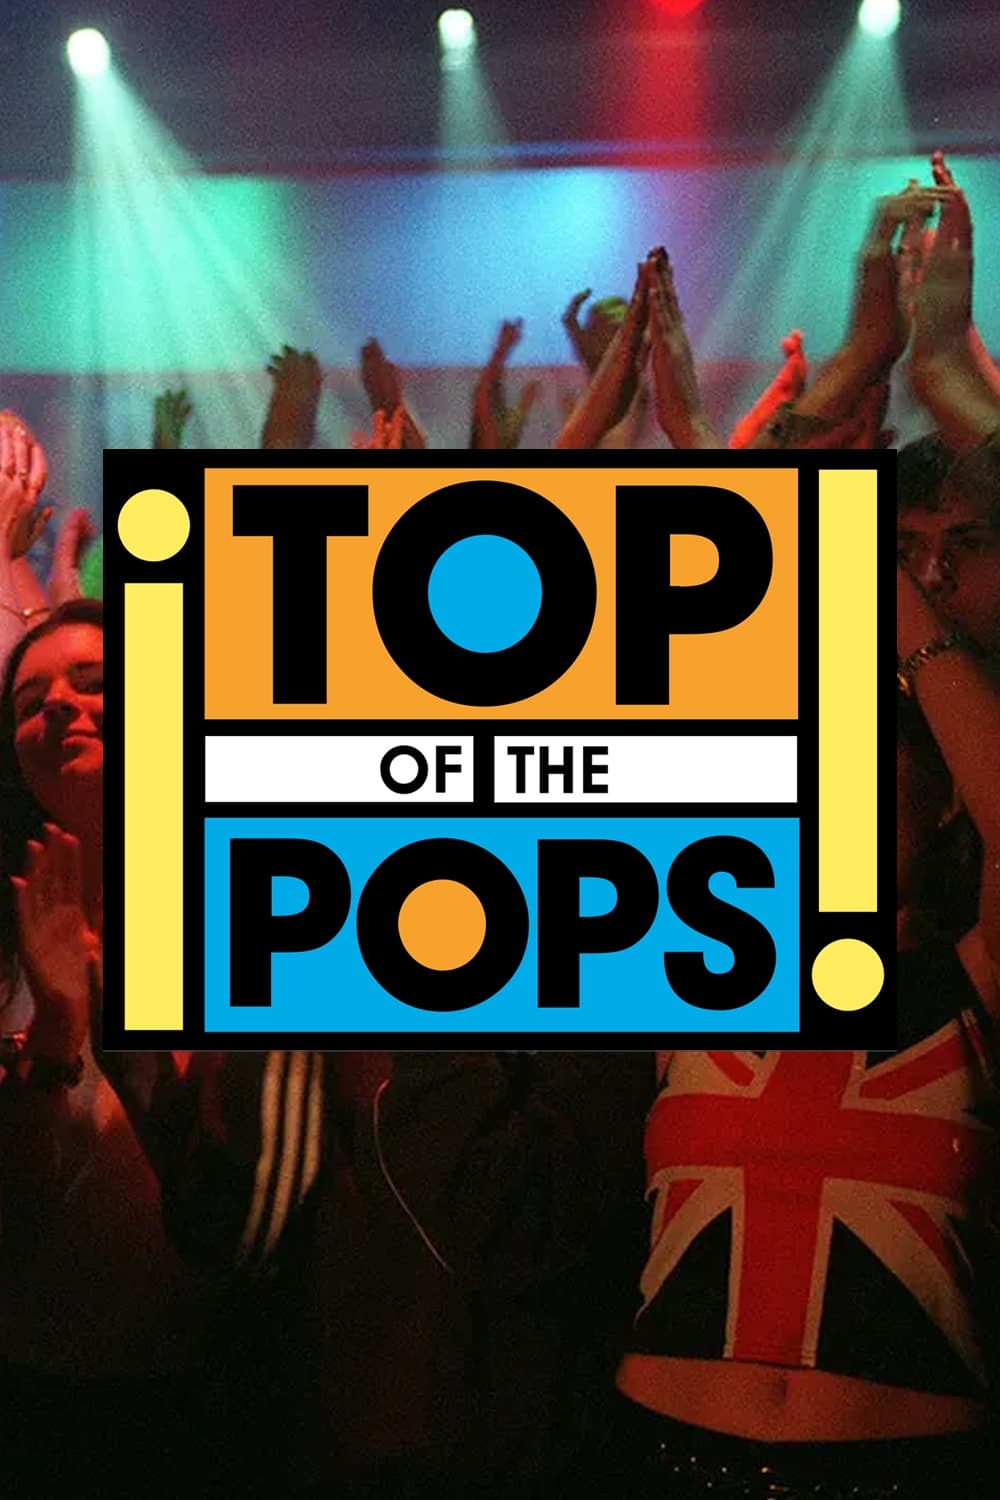 Top of the pops (FR)